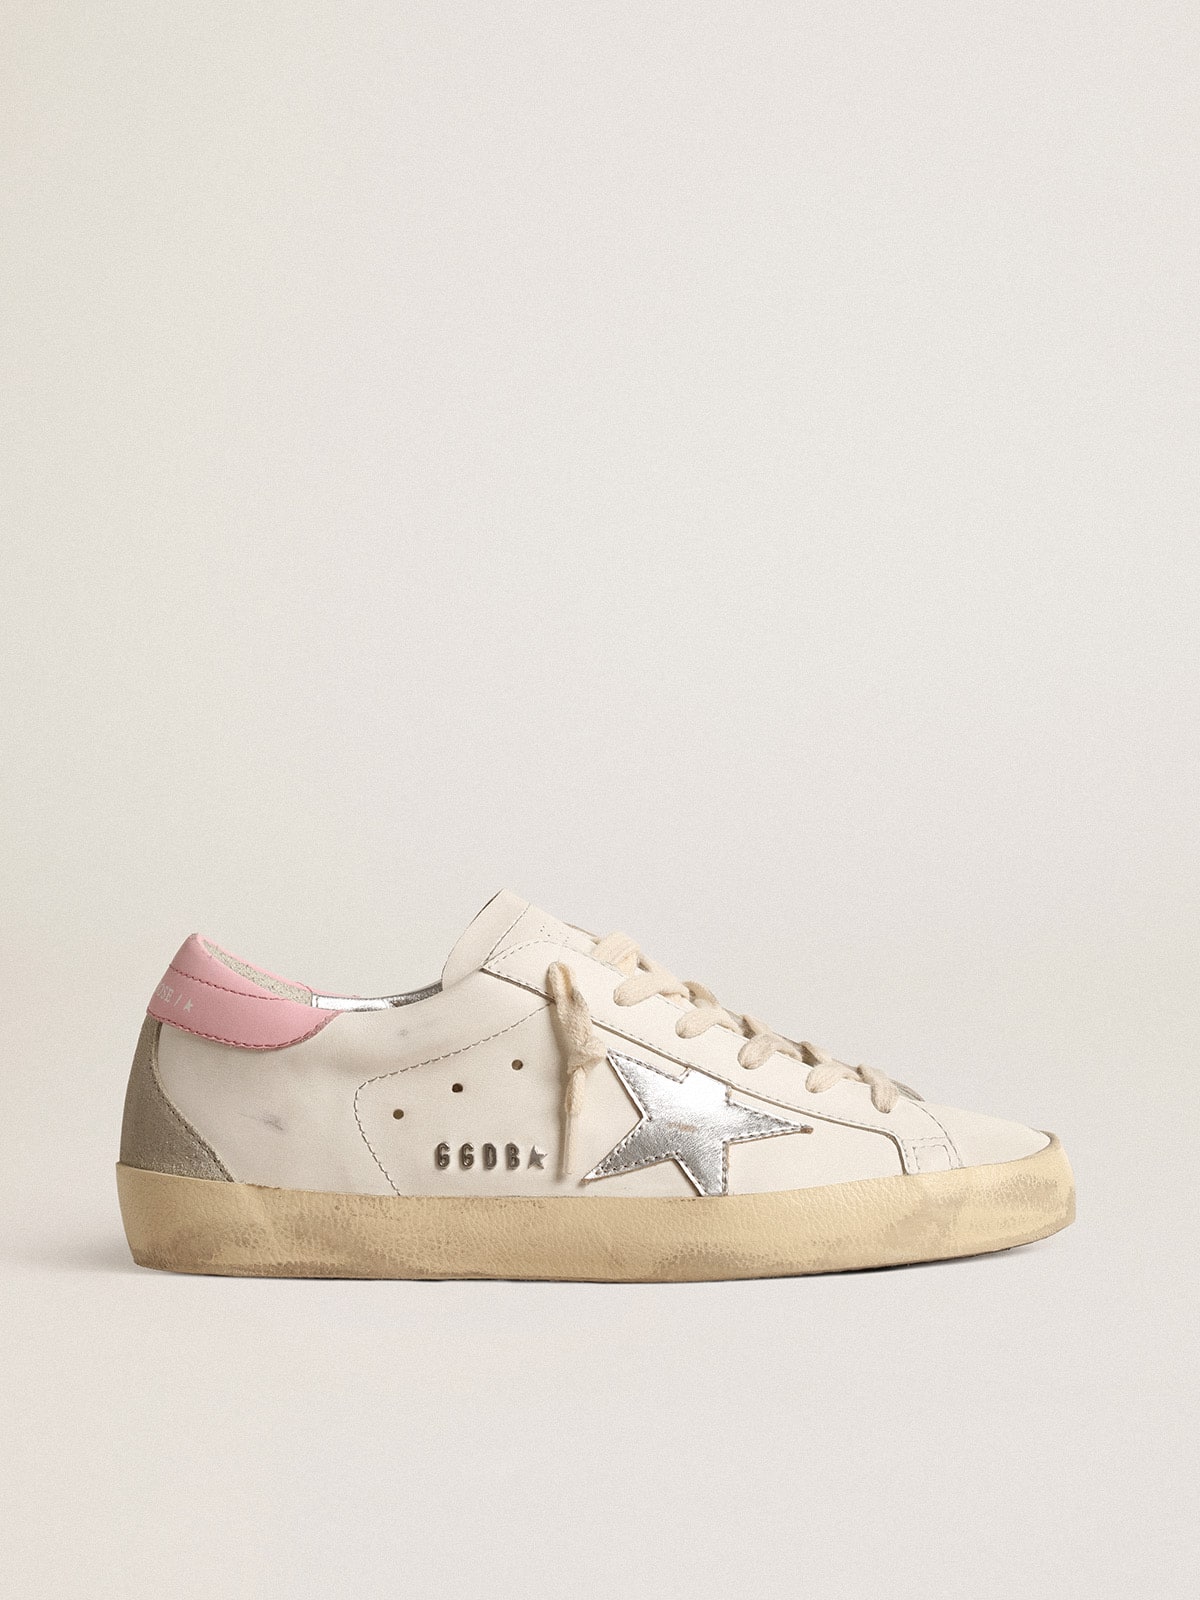 Women's Super-Star with silver leather star and pink heel tab | Golden Goose